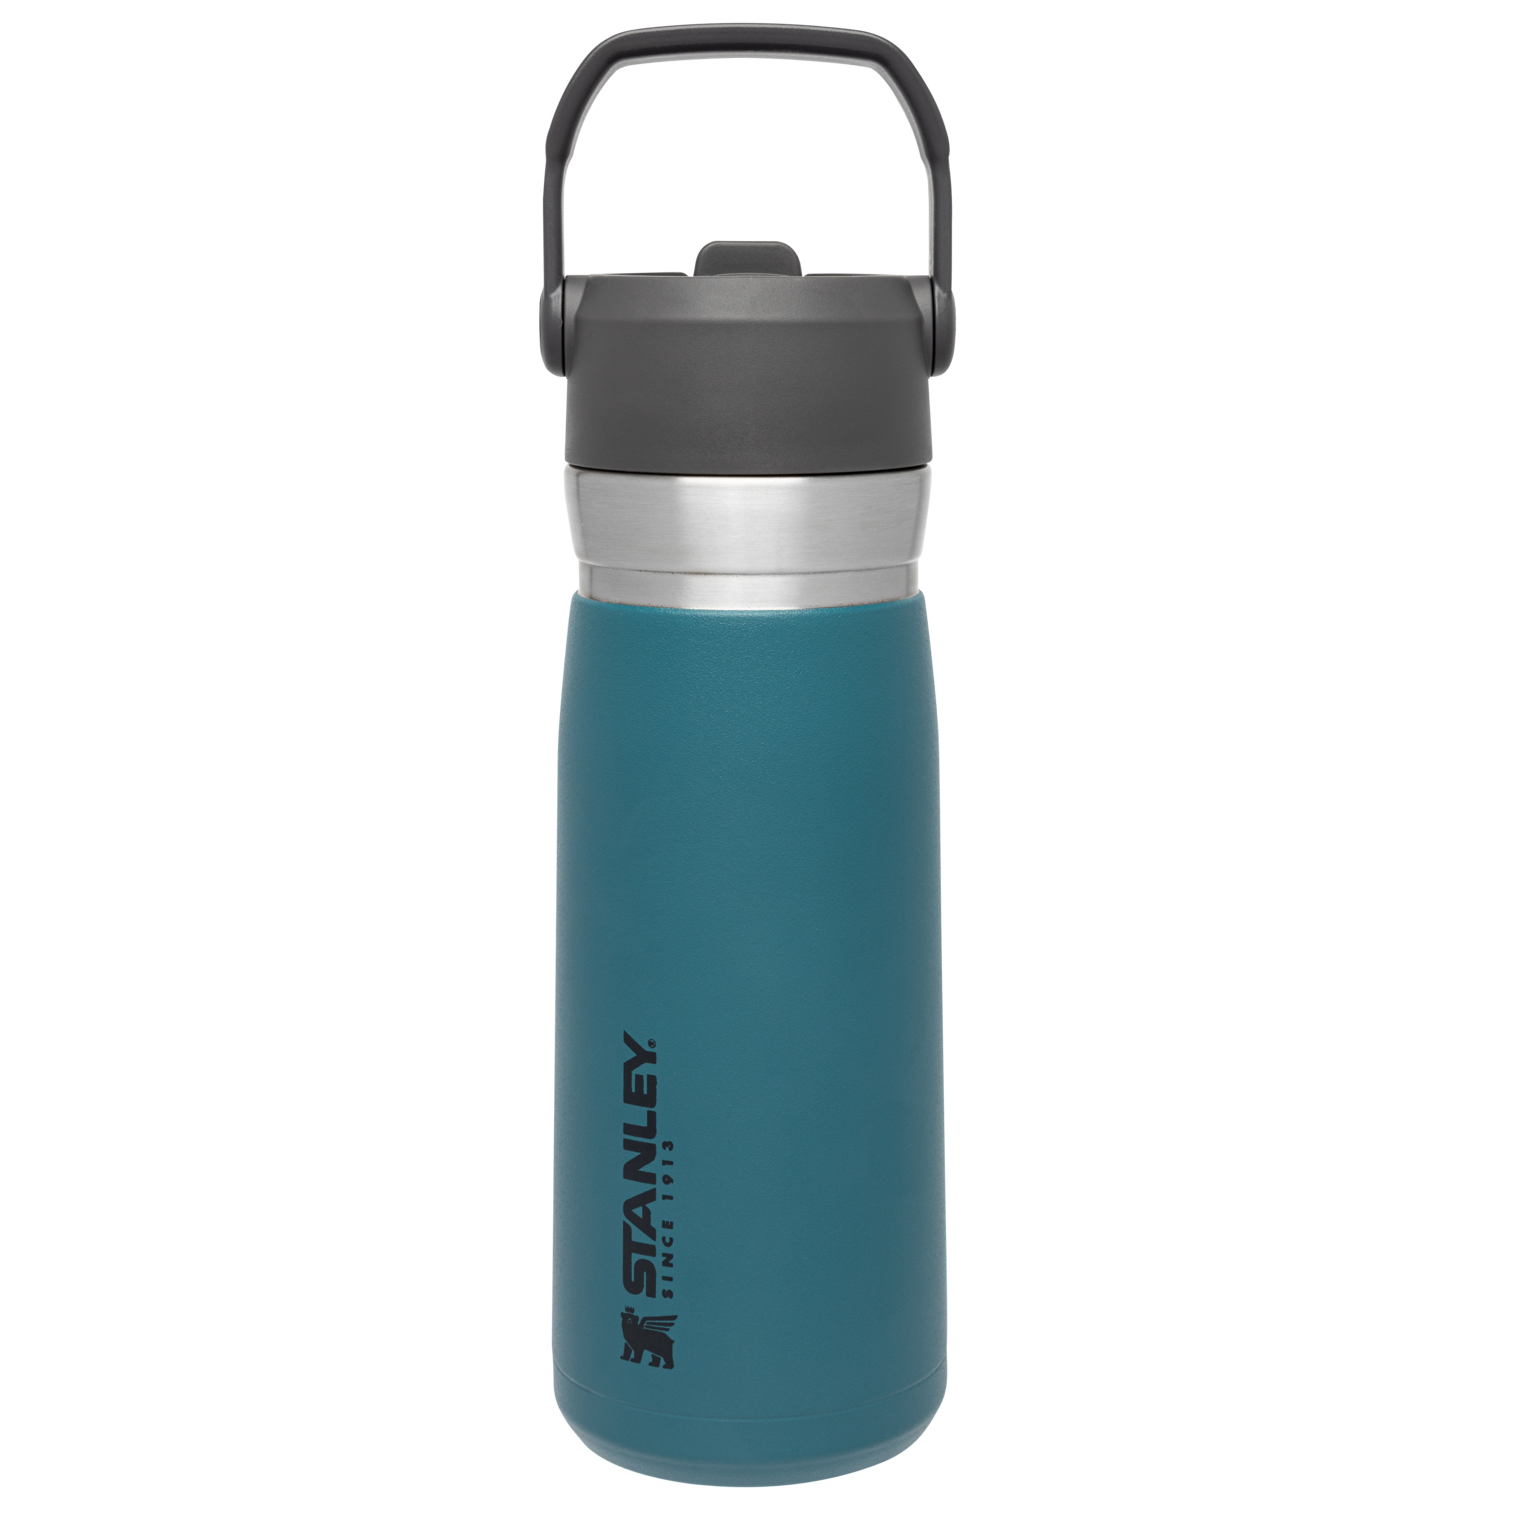 Stanley 22-Oz The Go Flip Straw Water Bottle $20.80, 25-Oz Adventure To-Go Bottle $18.20 & More + $6.95 Shipping